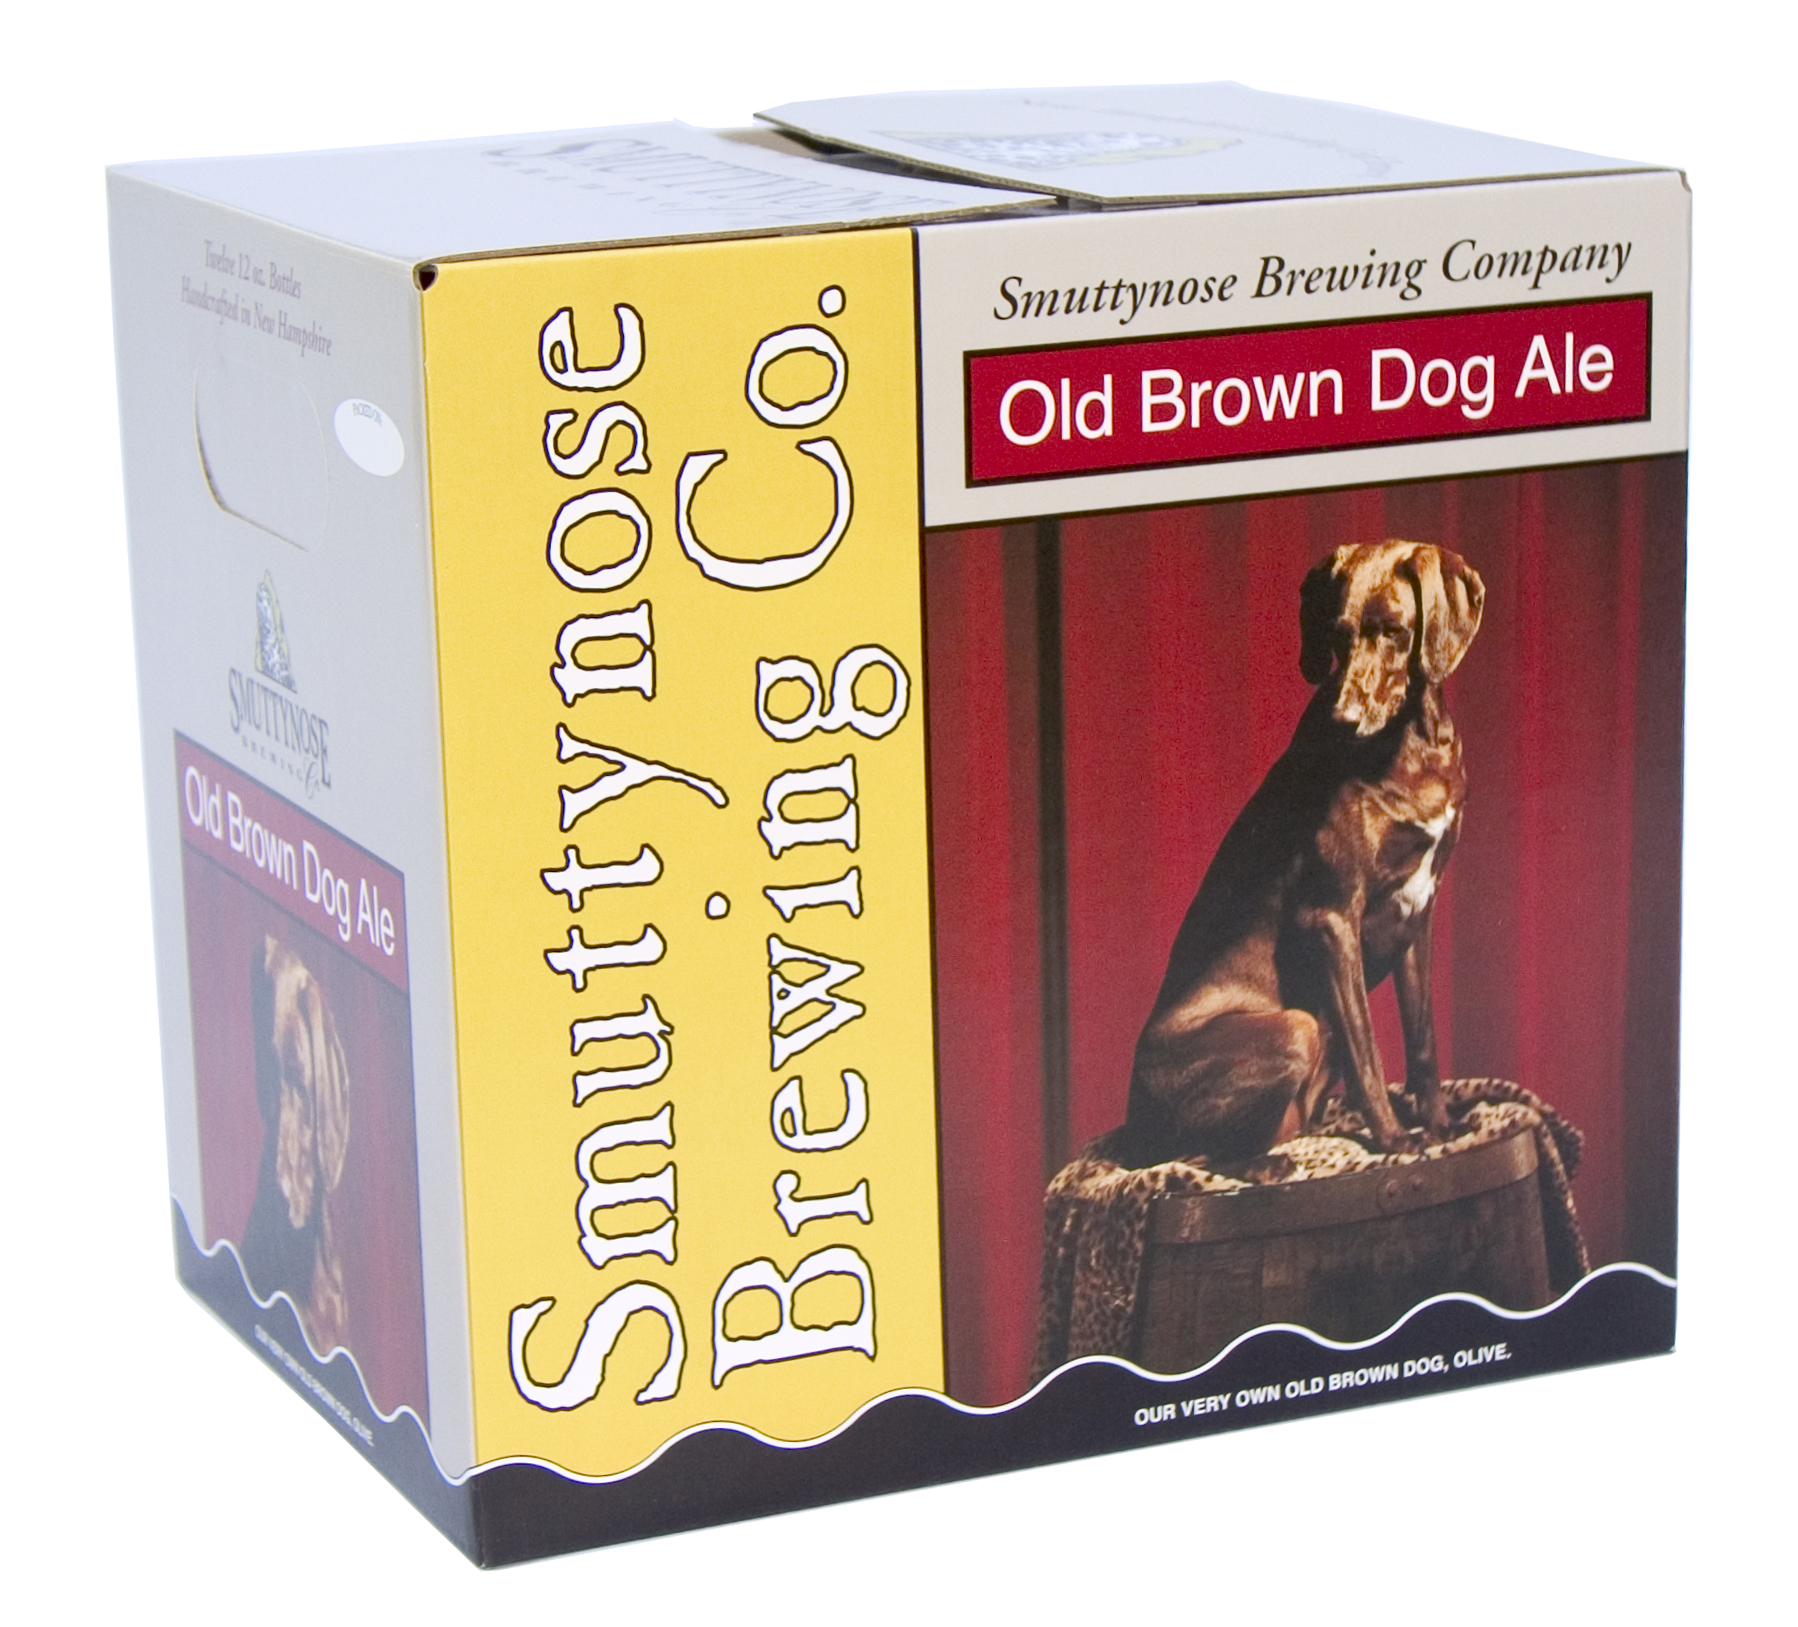 Smuttynose Old Brown Dog